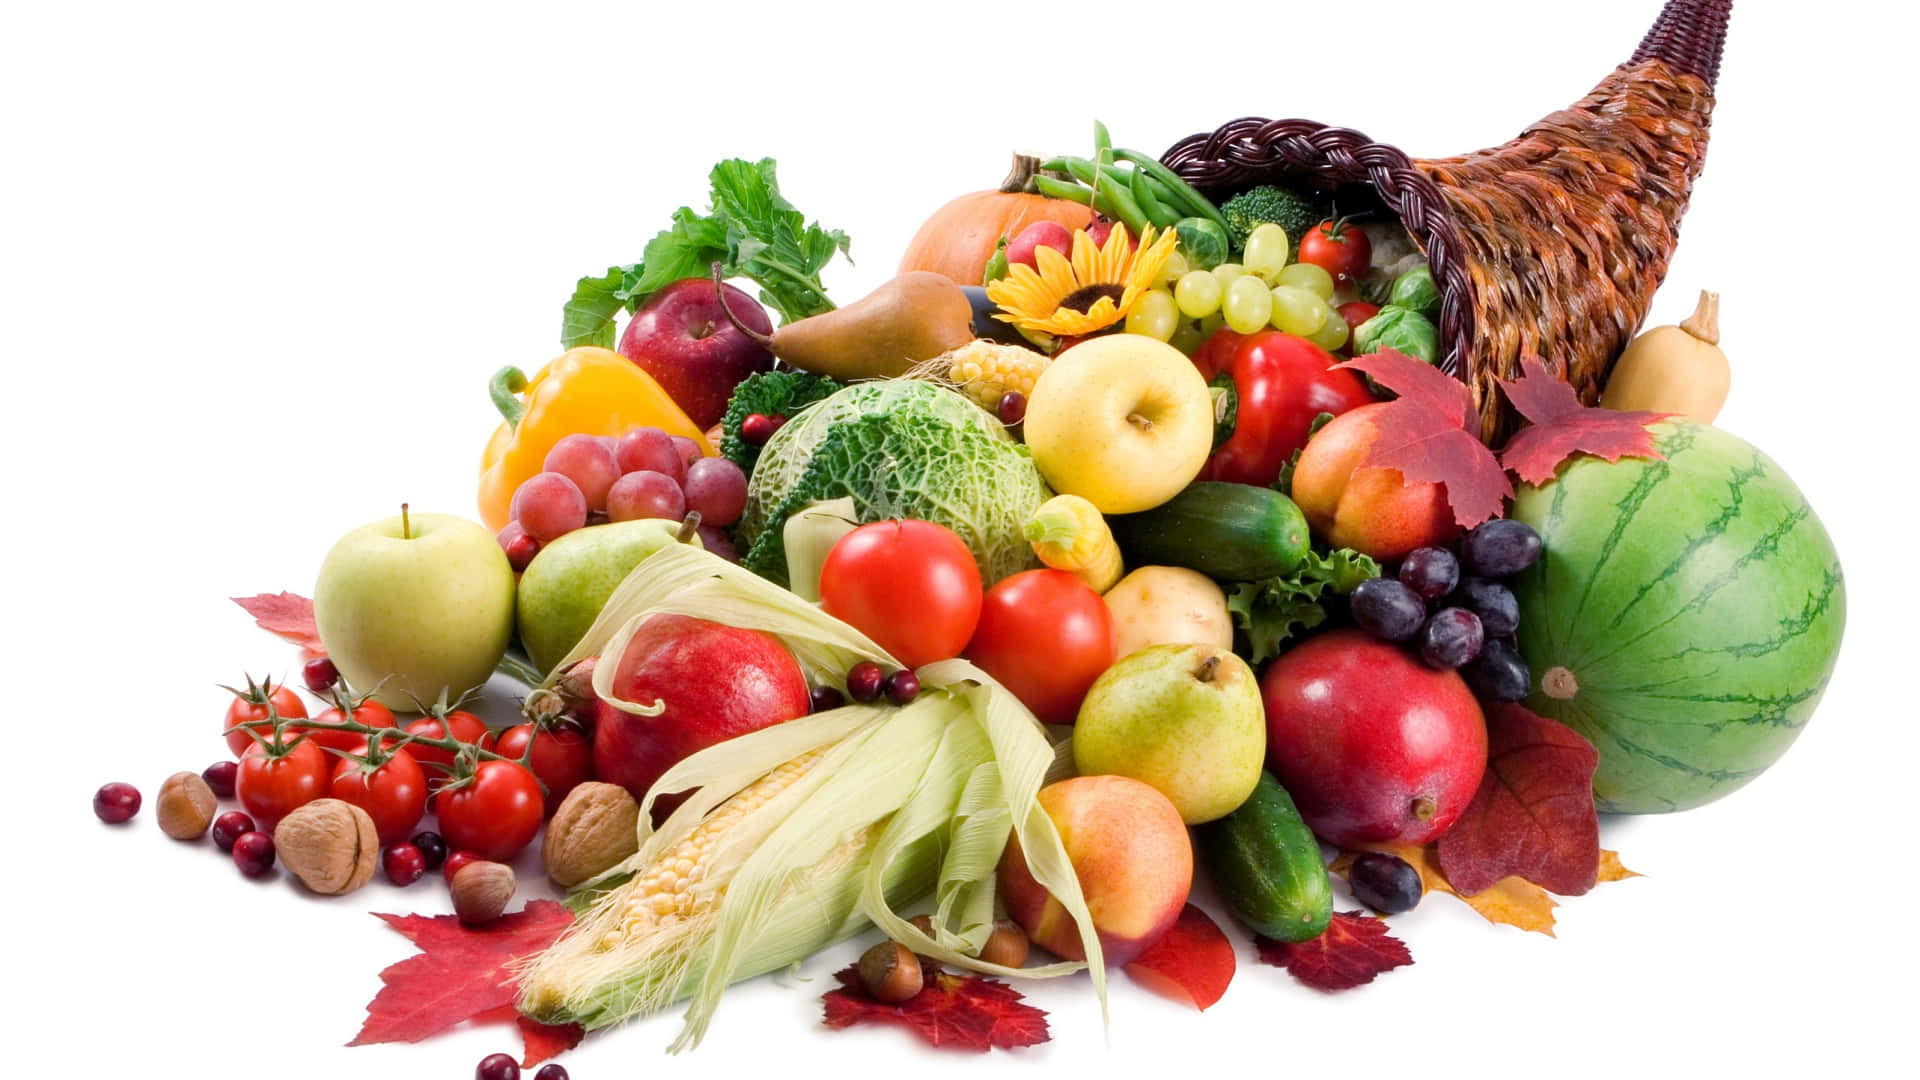 Fruits And Vegetables In A Heap Wallpaper